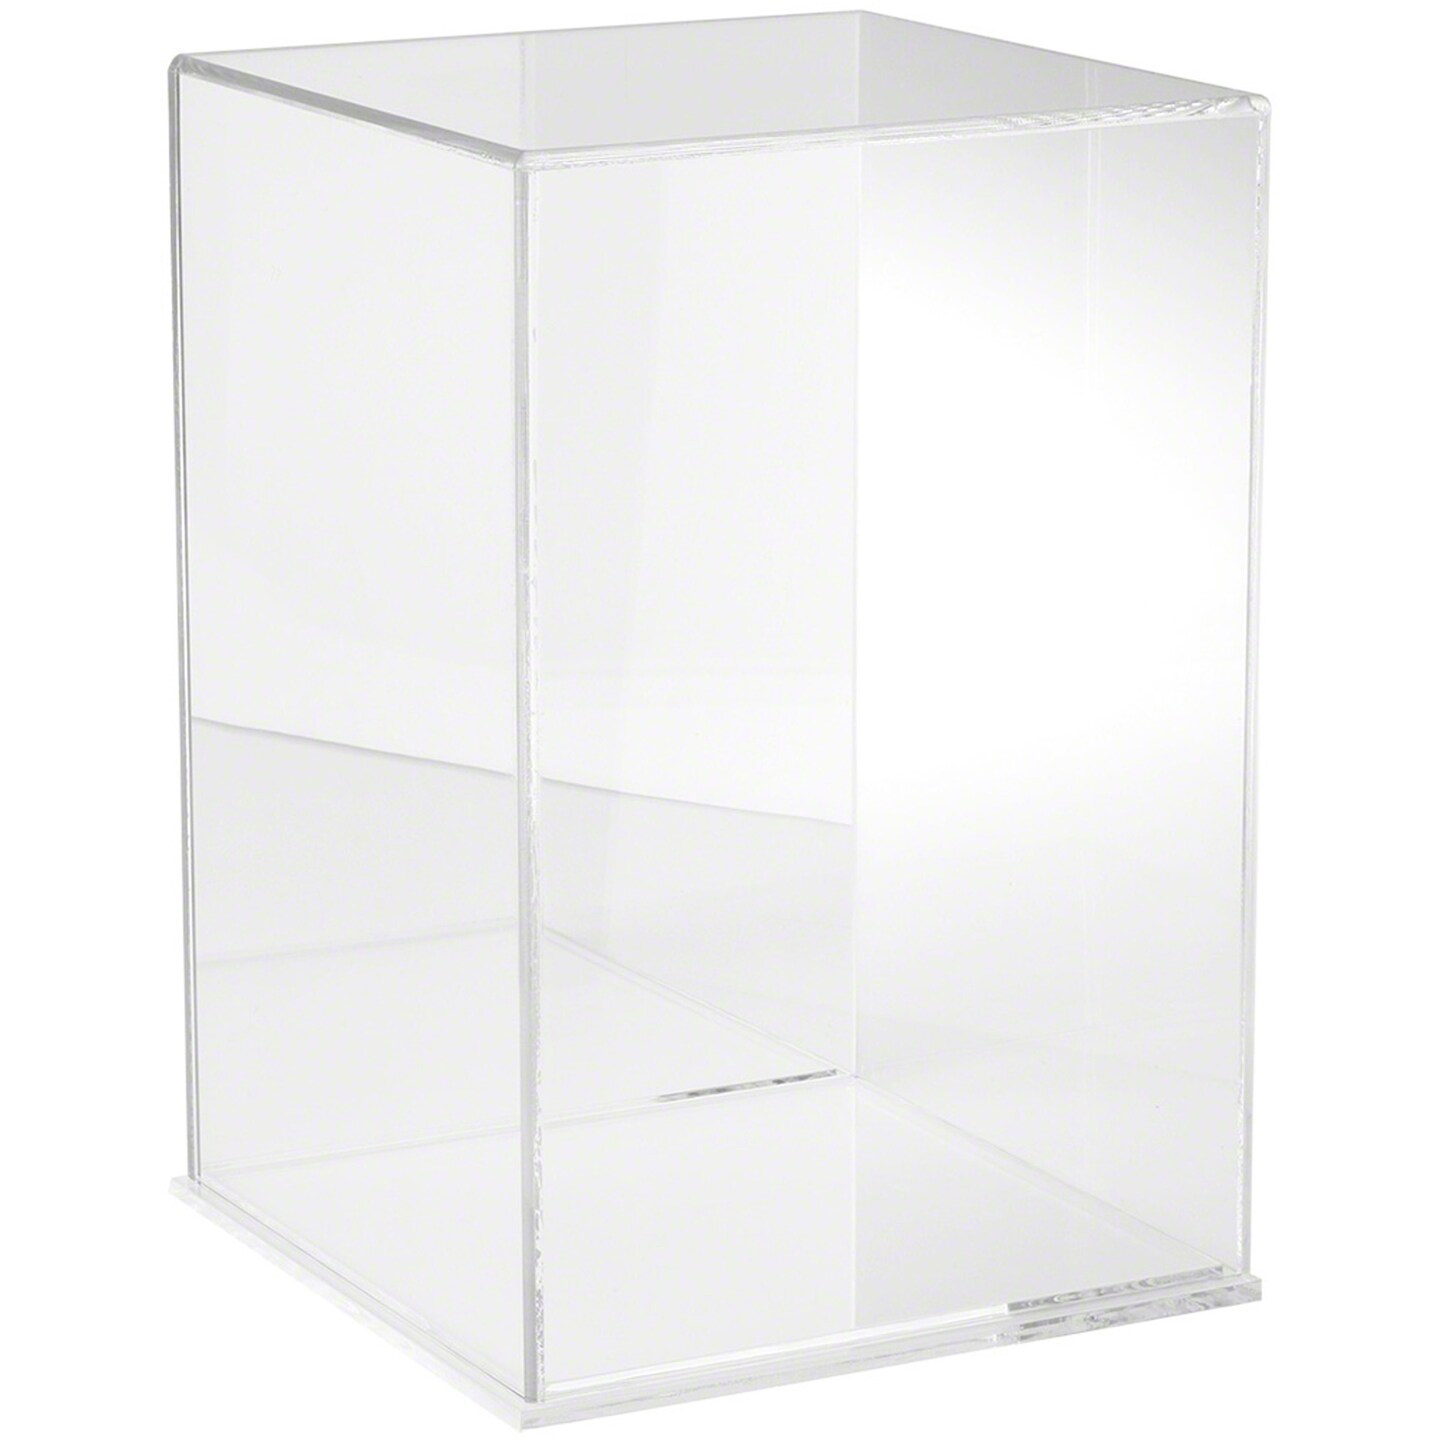 70-inch Display Case with Light - Extra Vision